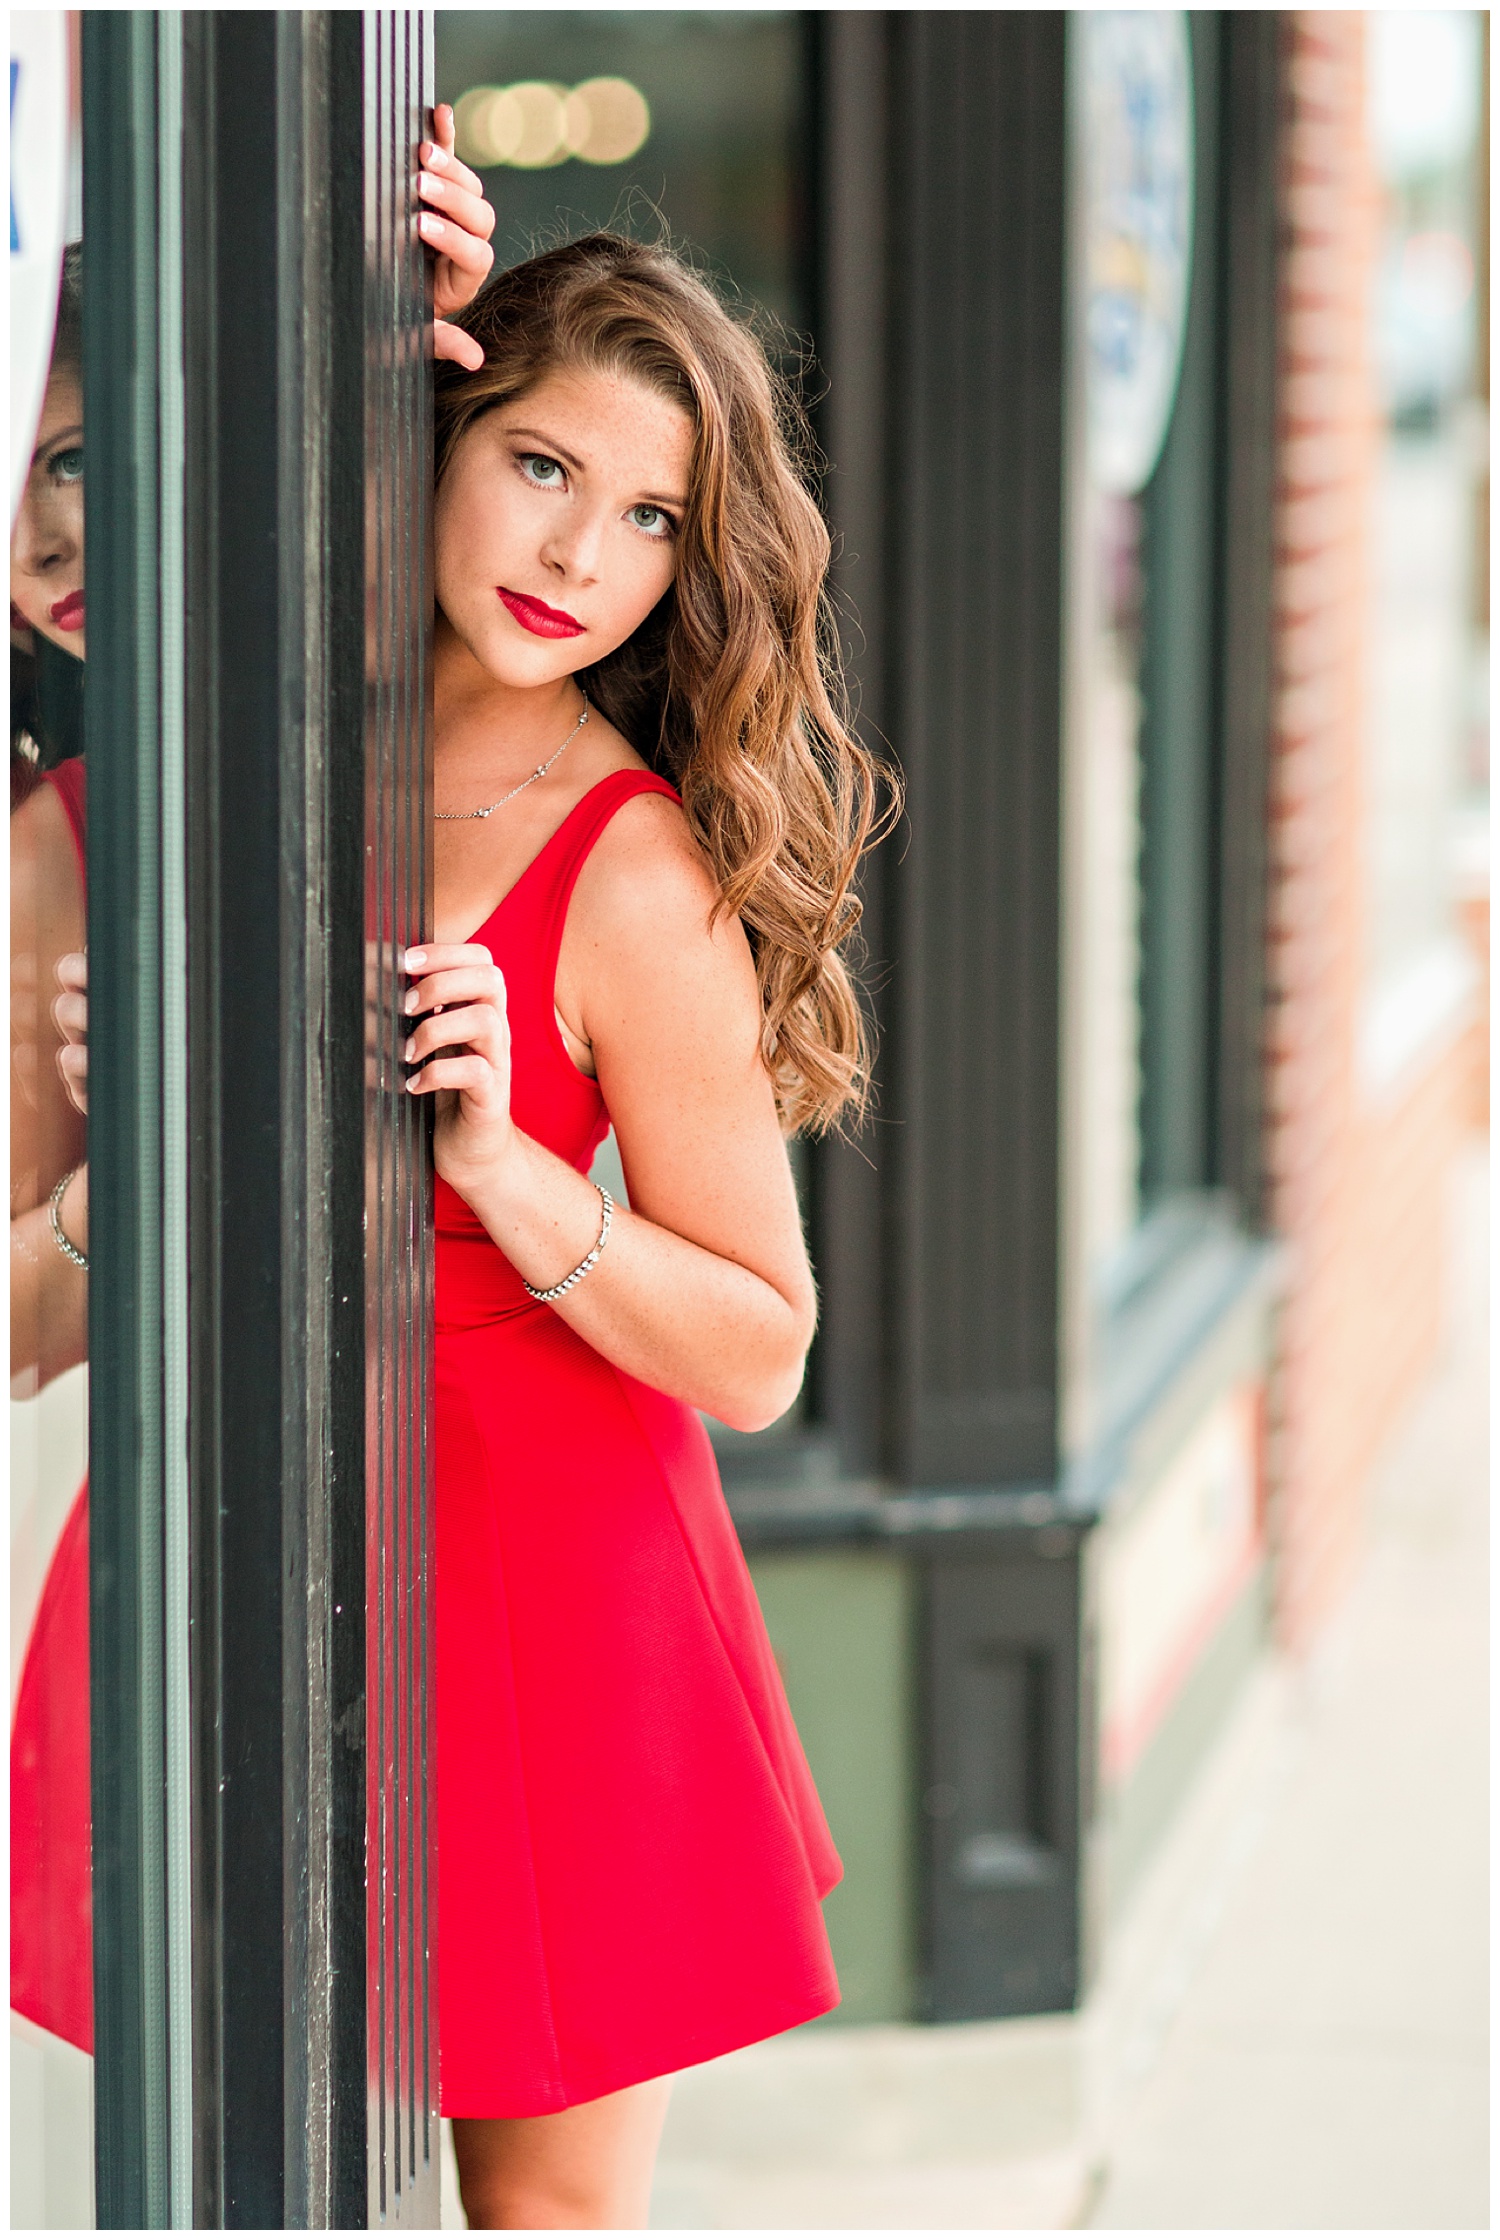 Iowa senior girl wearing a red dress appearing from a door in downtown Algona, Iowa